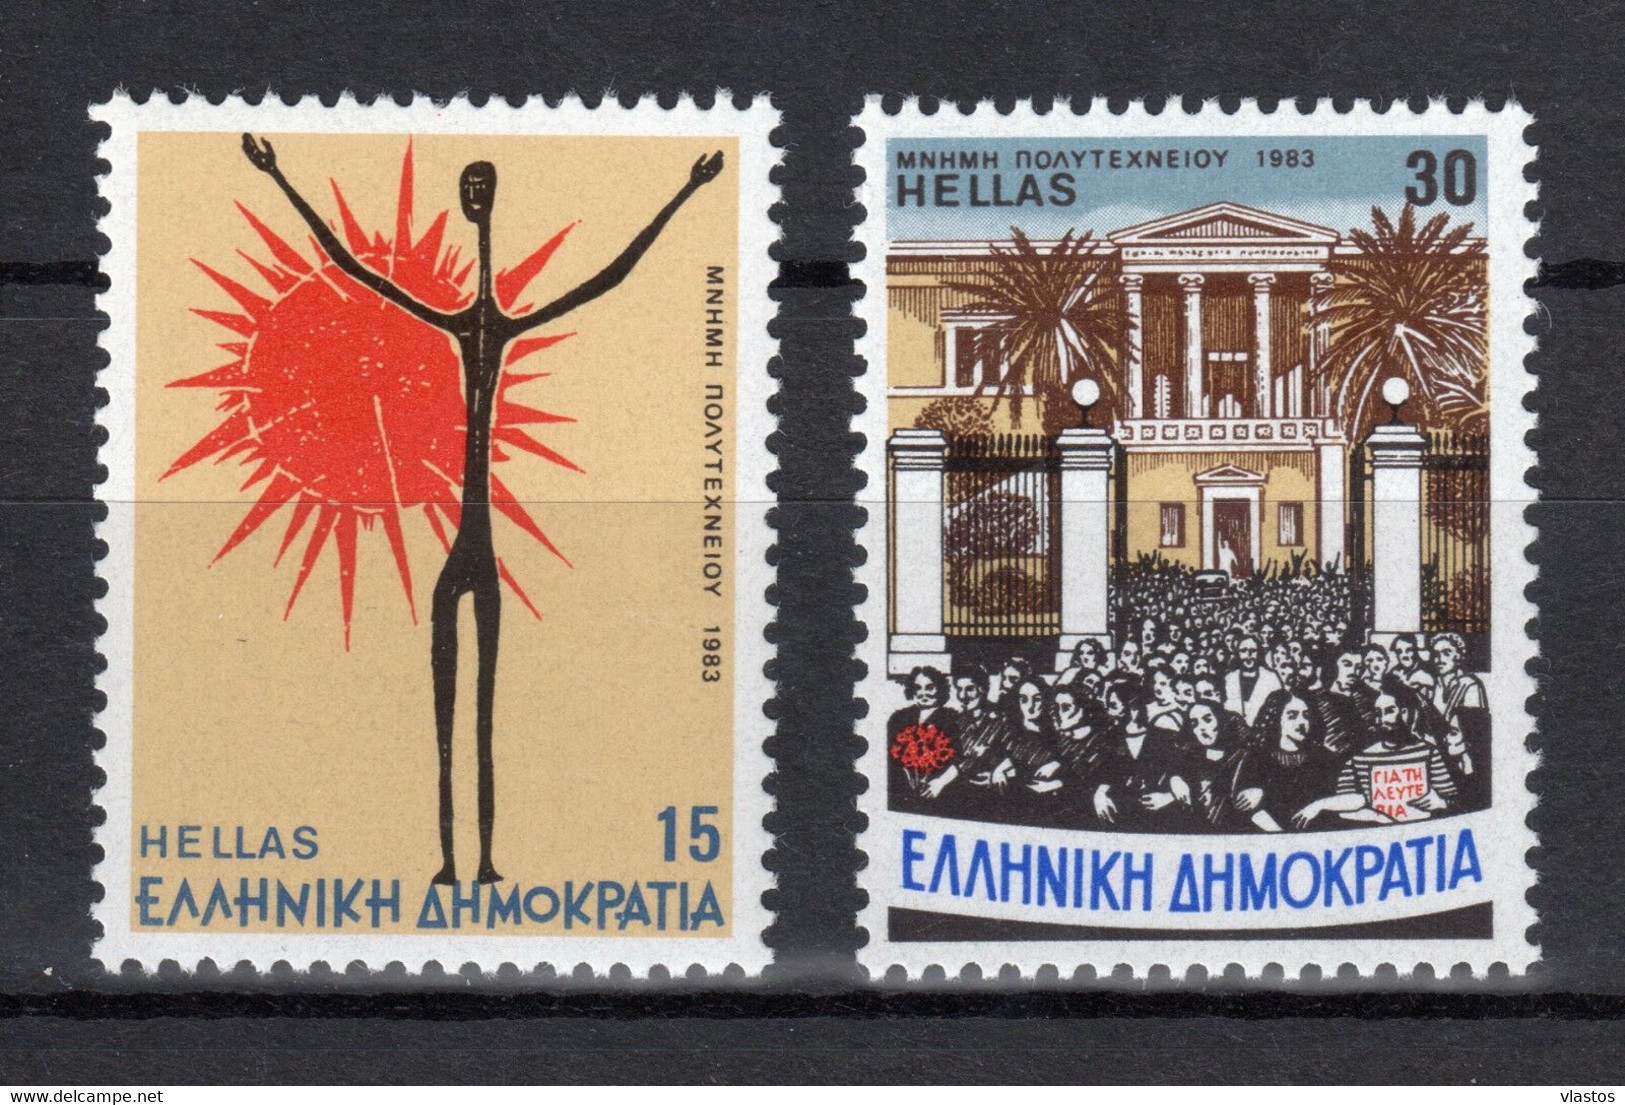 GREECE 1983 COMPLETE YEAR MNH